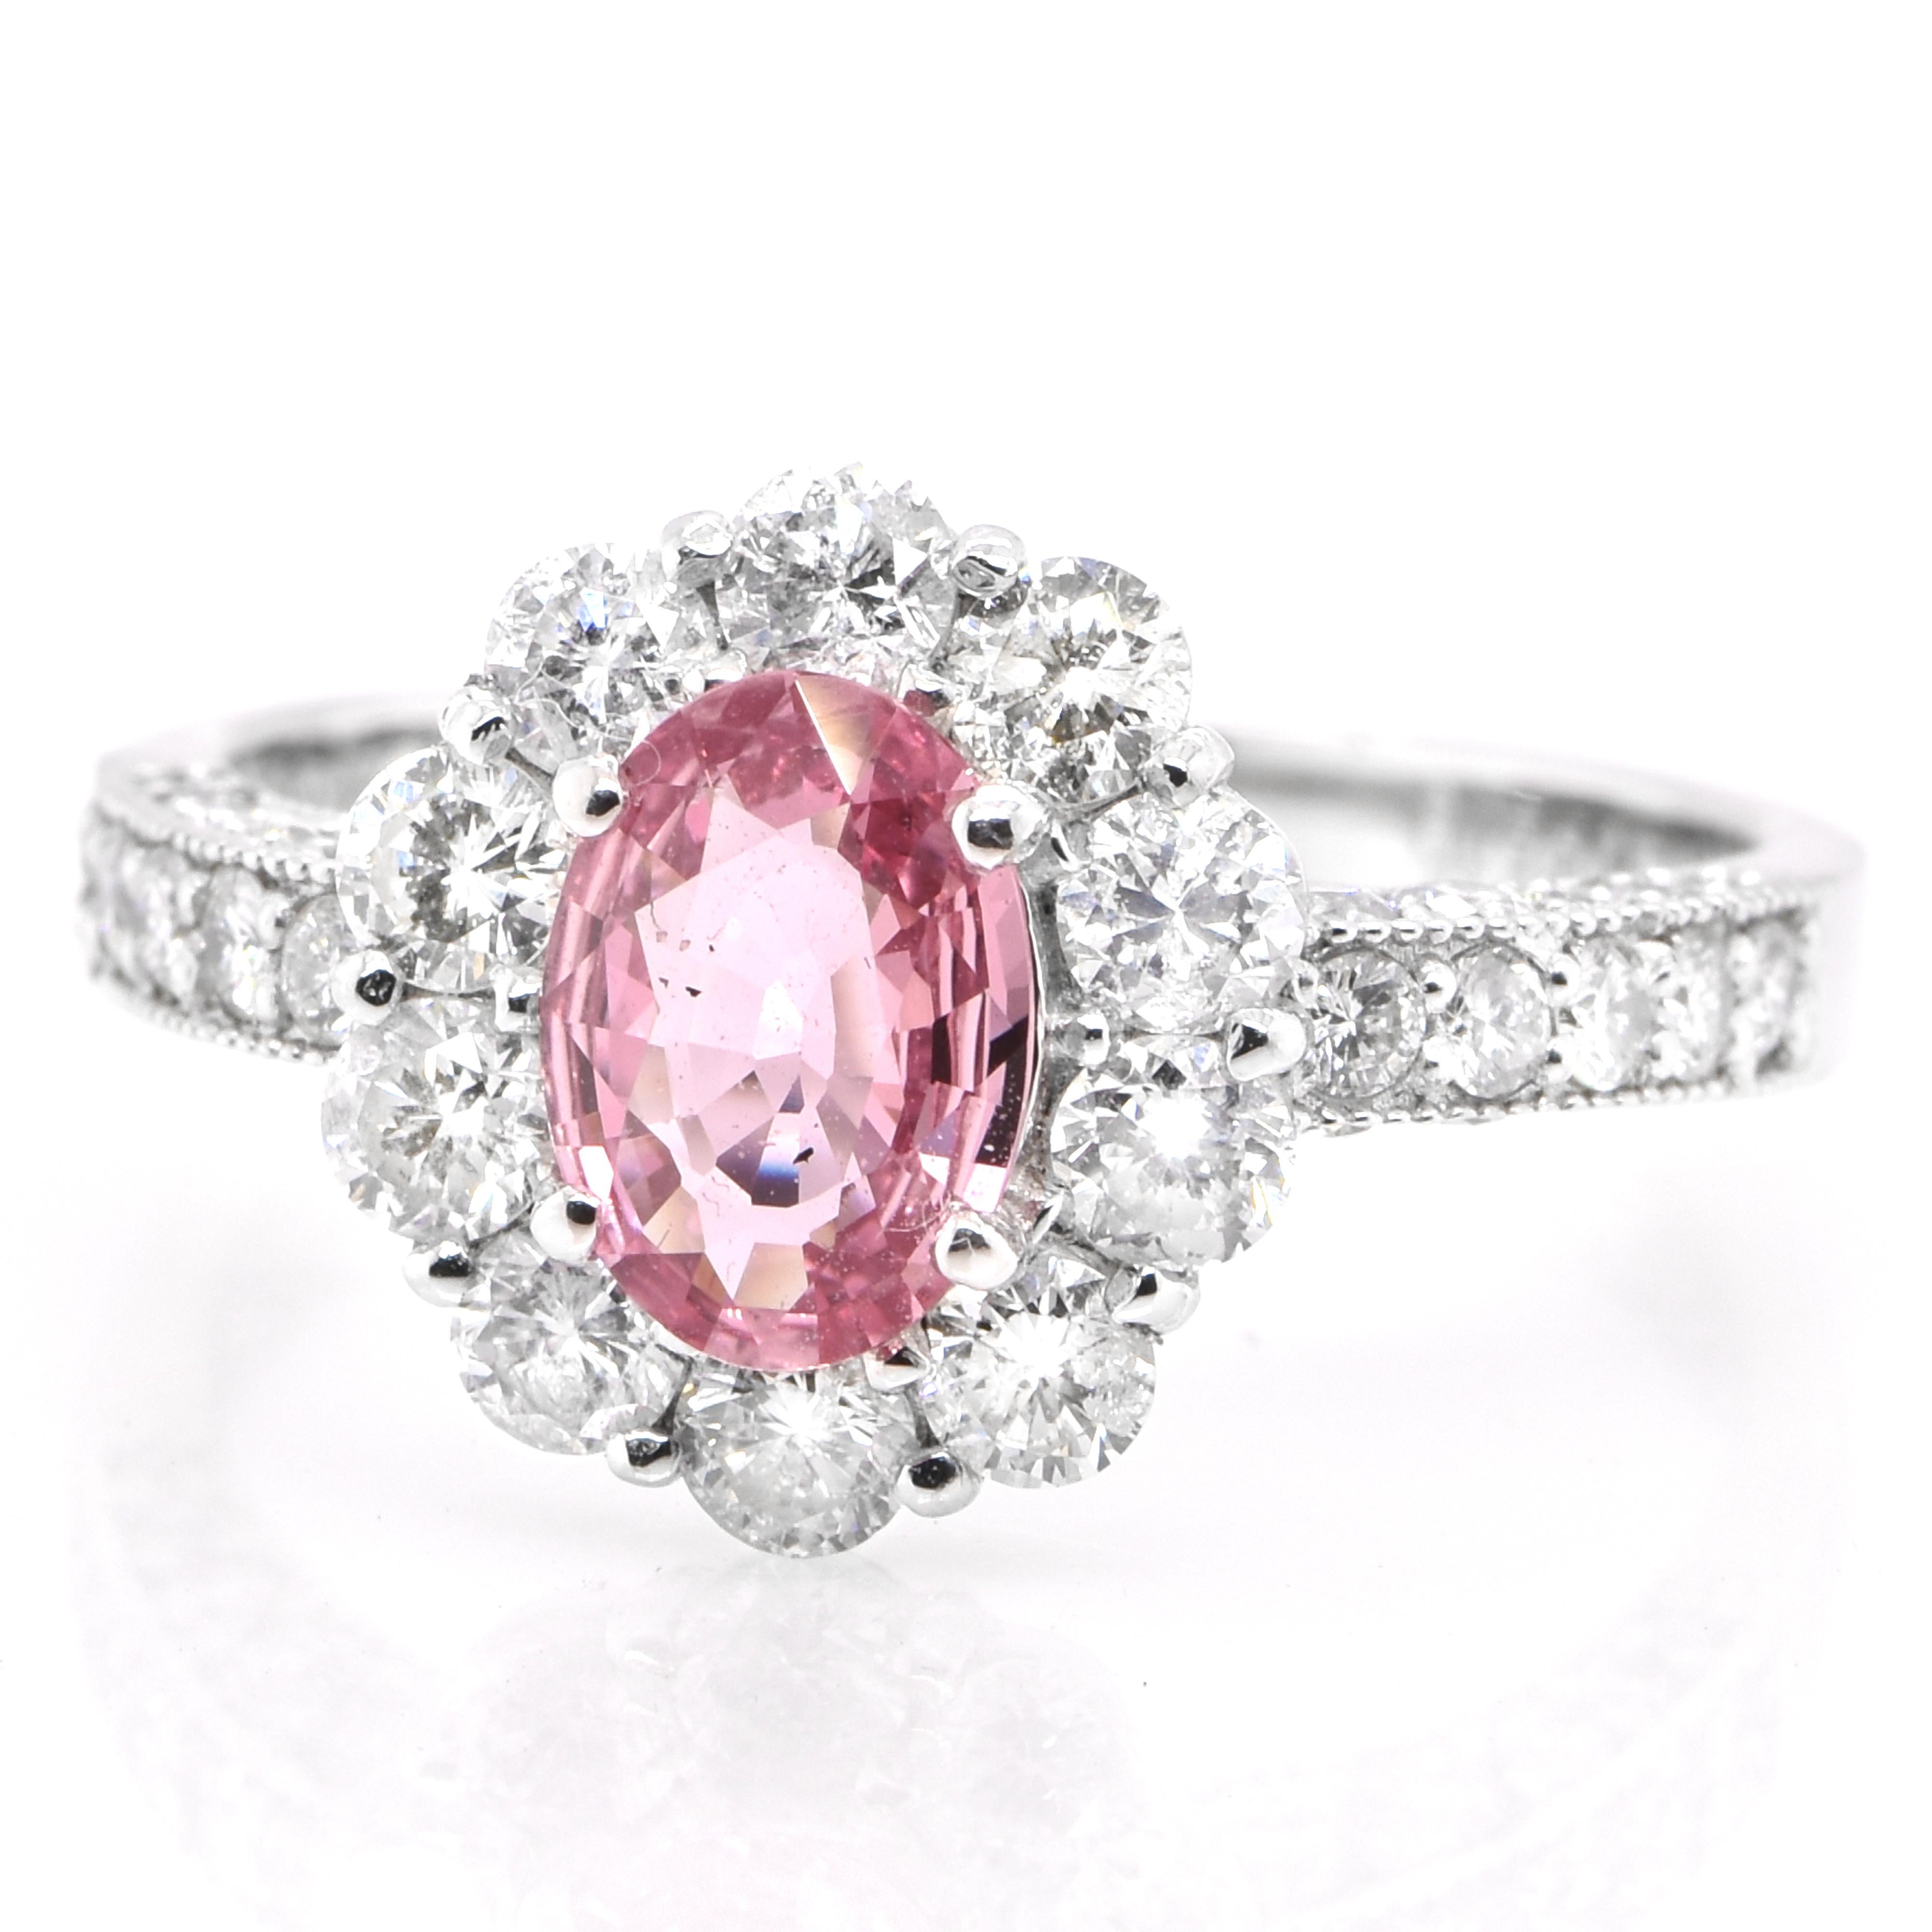 A beautiful ring featuring 0.92 Carat Natural Padparadscha Sapphire and 1.31 Carats of Diamond Accents set in Platinum. Sapphires have extraordinary durability - they excel in hardness as well as toughness and durability making them very popular in